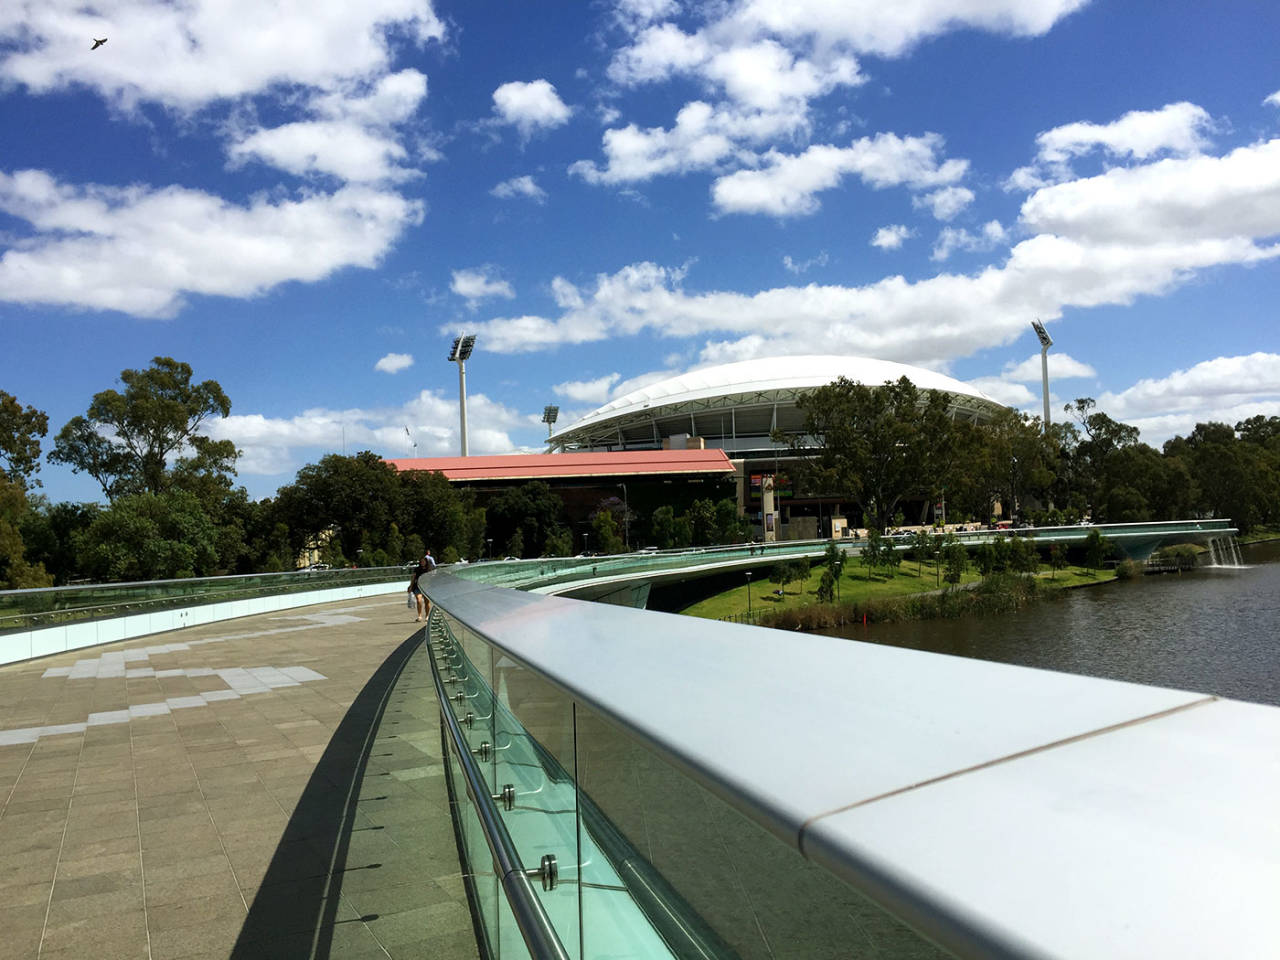 The walkway leading up to the Adelaide Oval